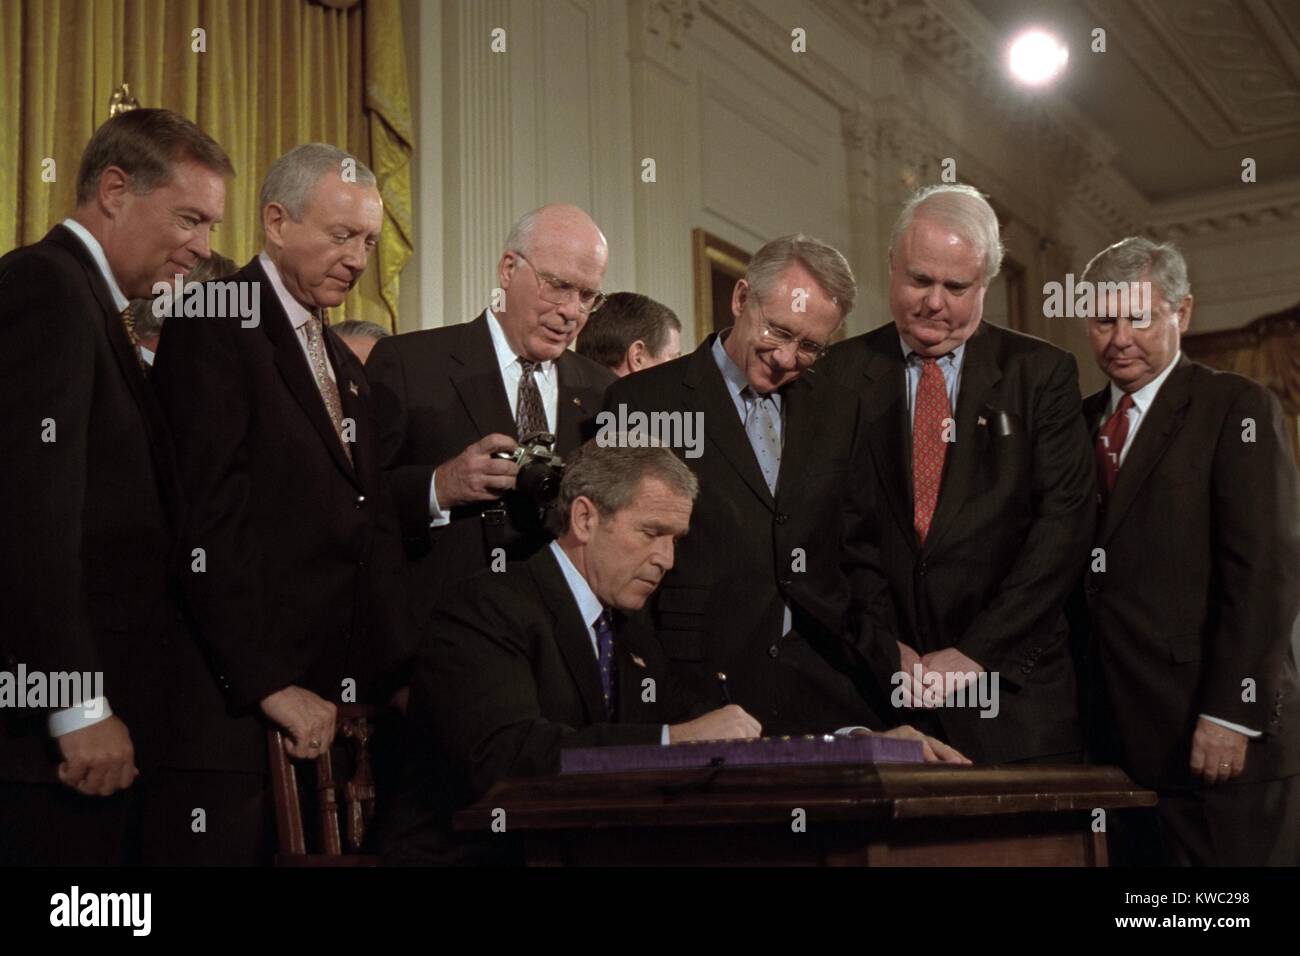 President George W. Bush signs the USA Patriot Act on Oct. 26,2001. 'This new law that I sign today will allow surveillance of all communications used by terrorists, including e-mails, the Internet, and cell phones.' Standing behind Bush 43 from left are: U.S. AG, John Ashcroft; Sen. Orrin Hatch; Sen. Patrick Leahy; Sen. Harry Reid; Rep. James Sensenbrenner, and Sen. Bob Graham. (BSLOC 2015 2 178) Stock Photo